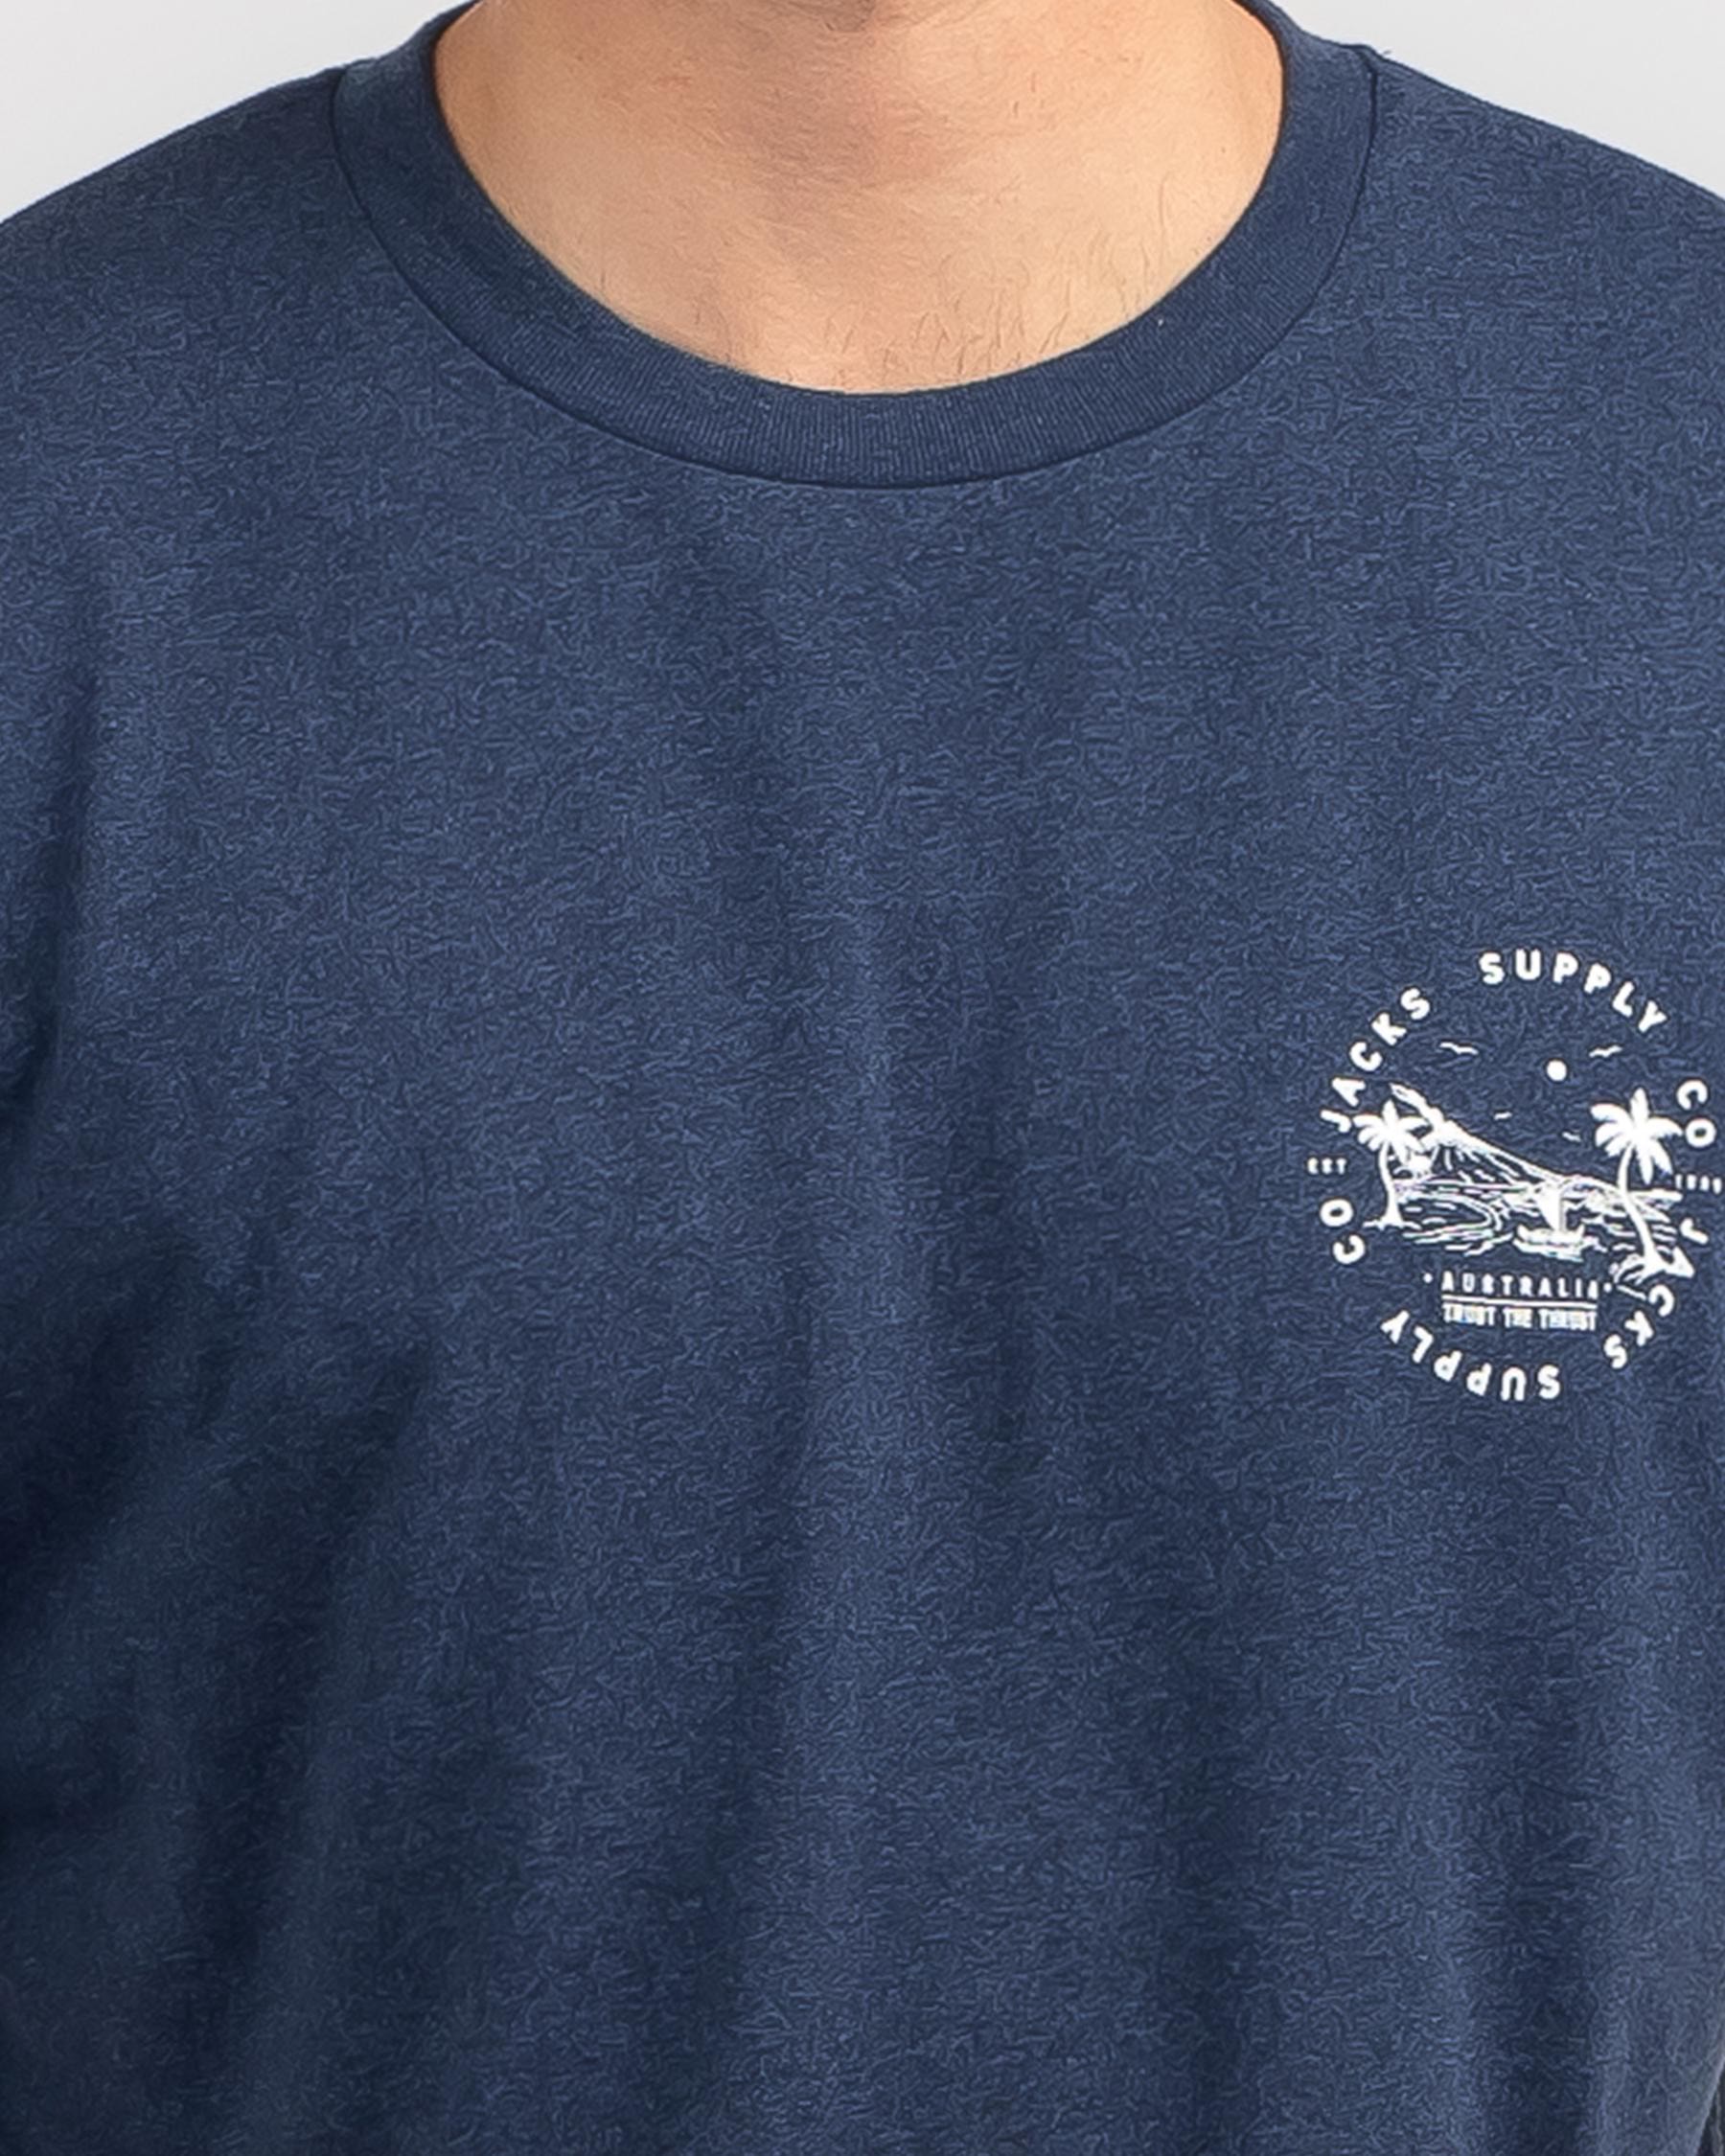 Jacks Reclined T-Shirt In Navy - Fast Shipping & Easy Returns - City ...